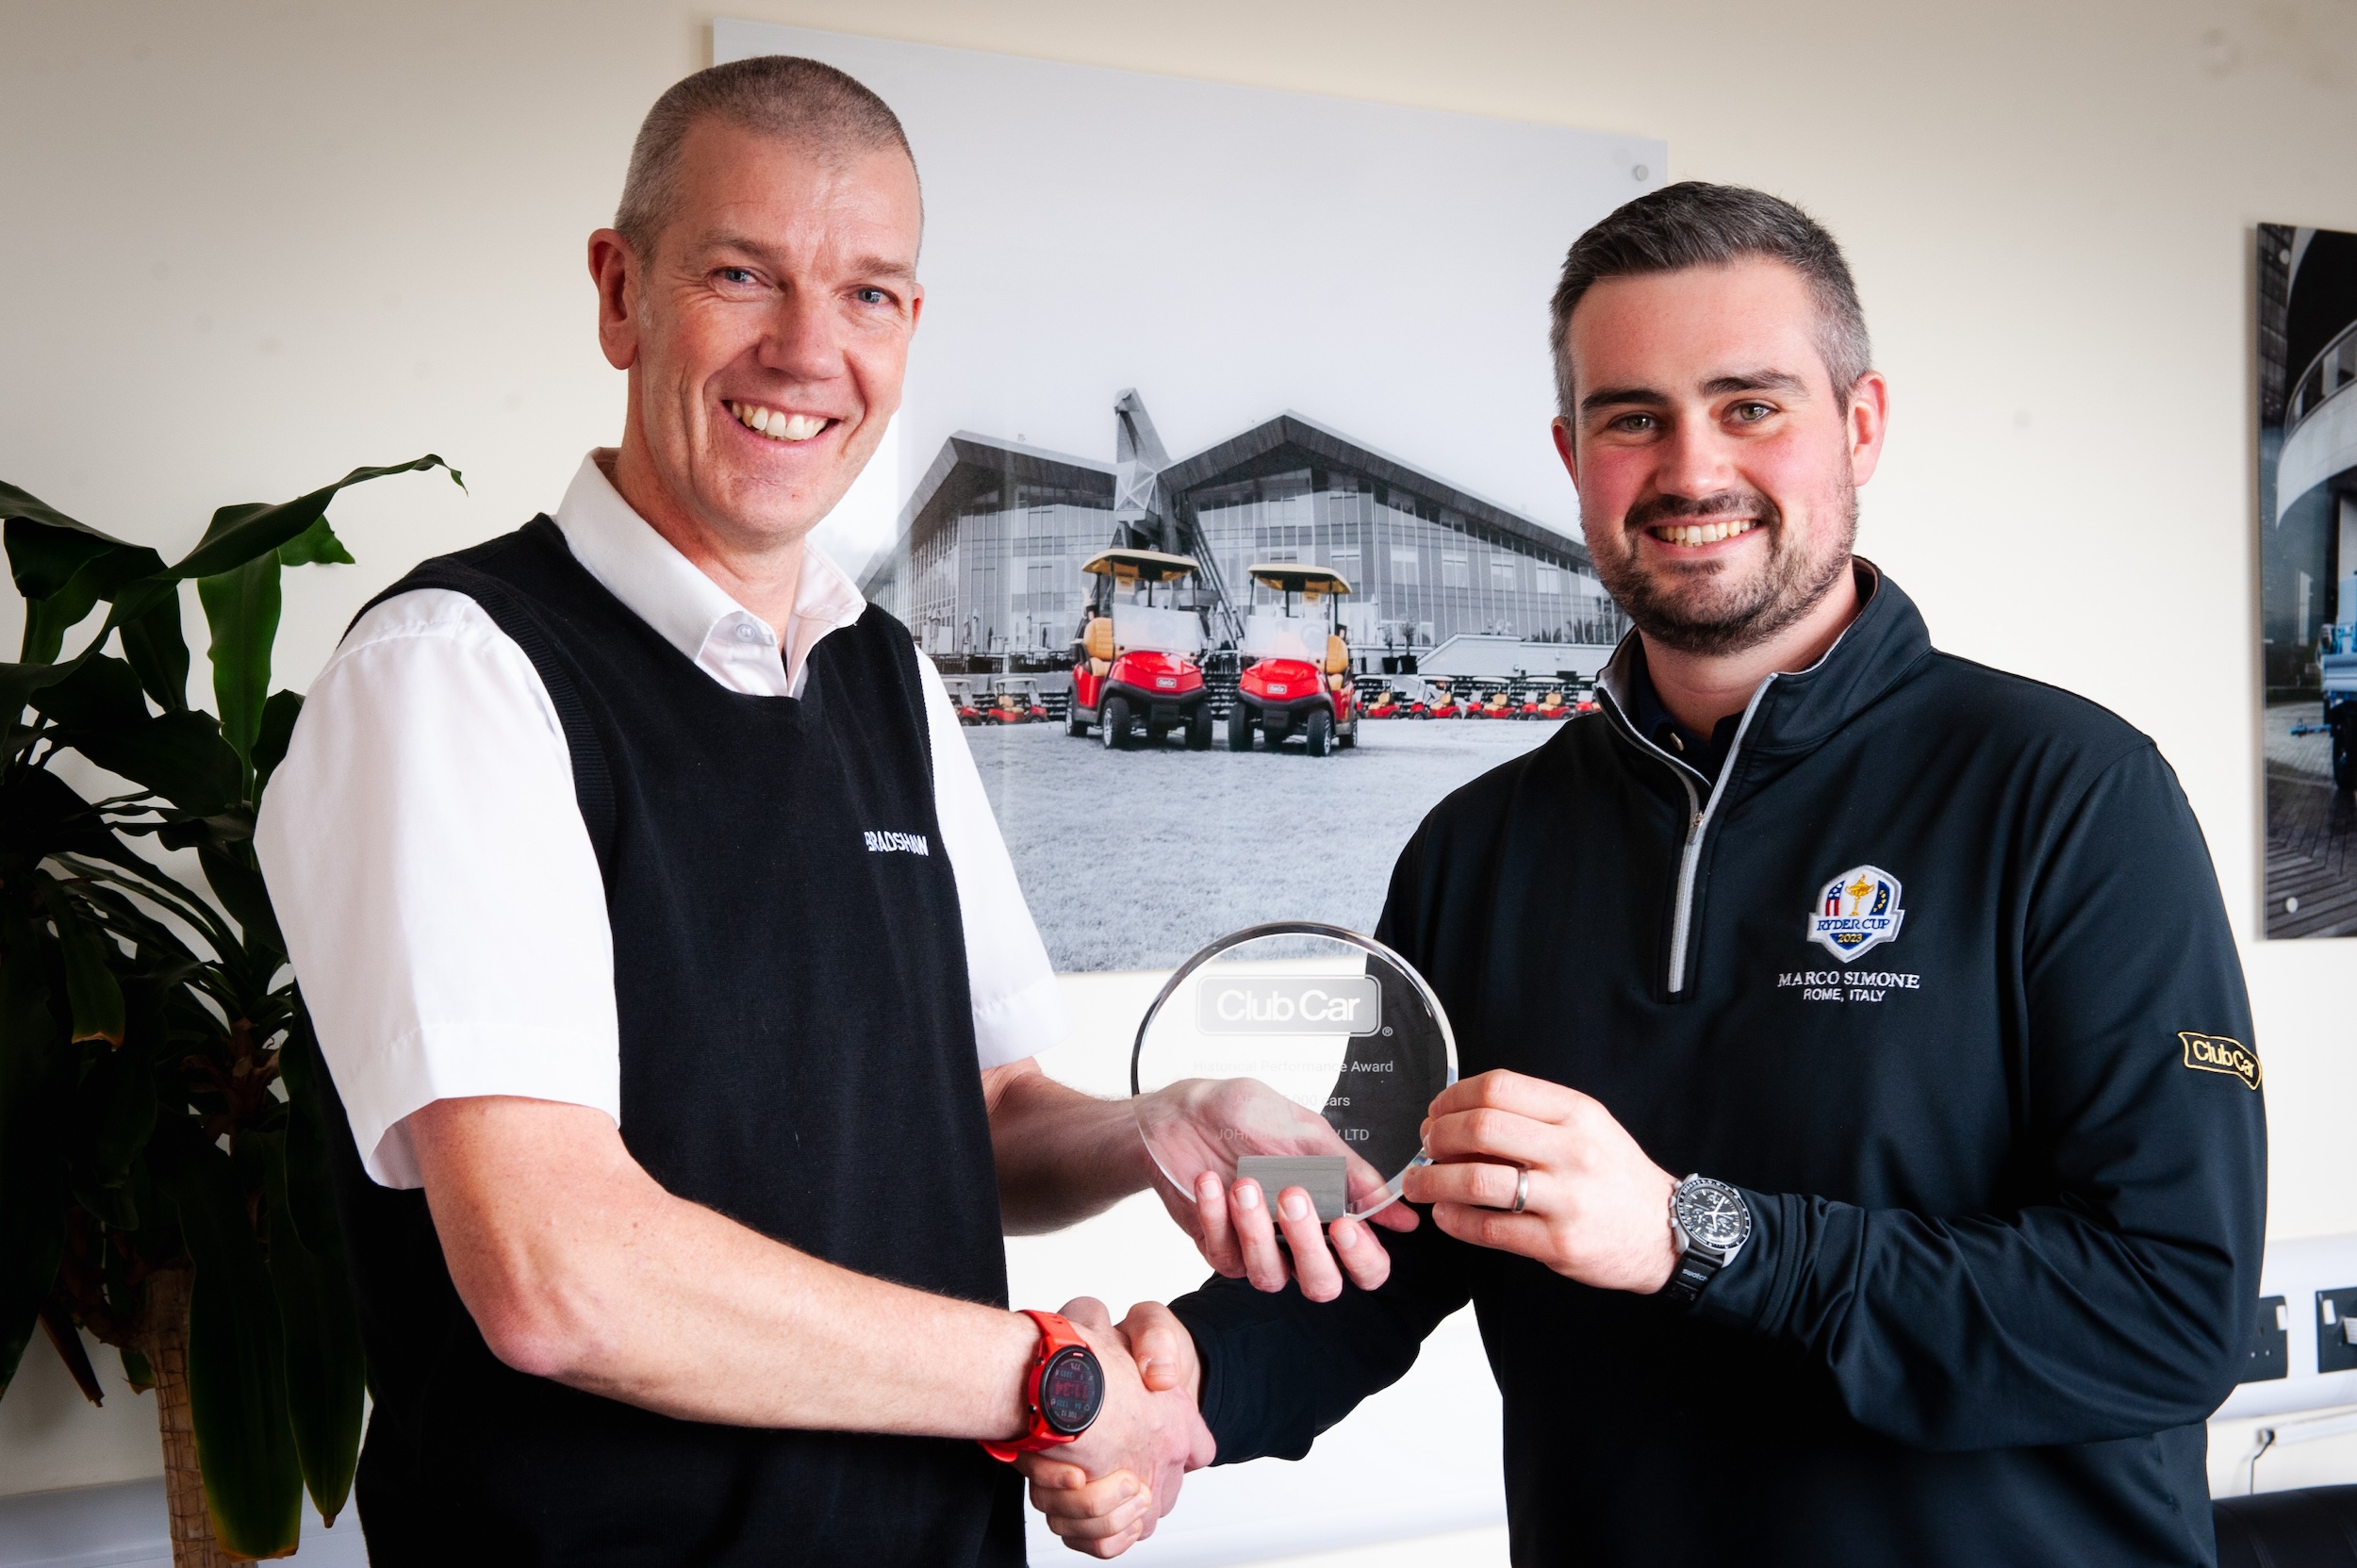 Drew Bradshaw, Joint Managing Director at Bradshaw EV, (left) receiving the award from Andy Bourke (right), Regional Sales Manager at Club Car